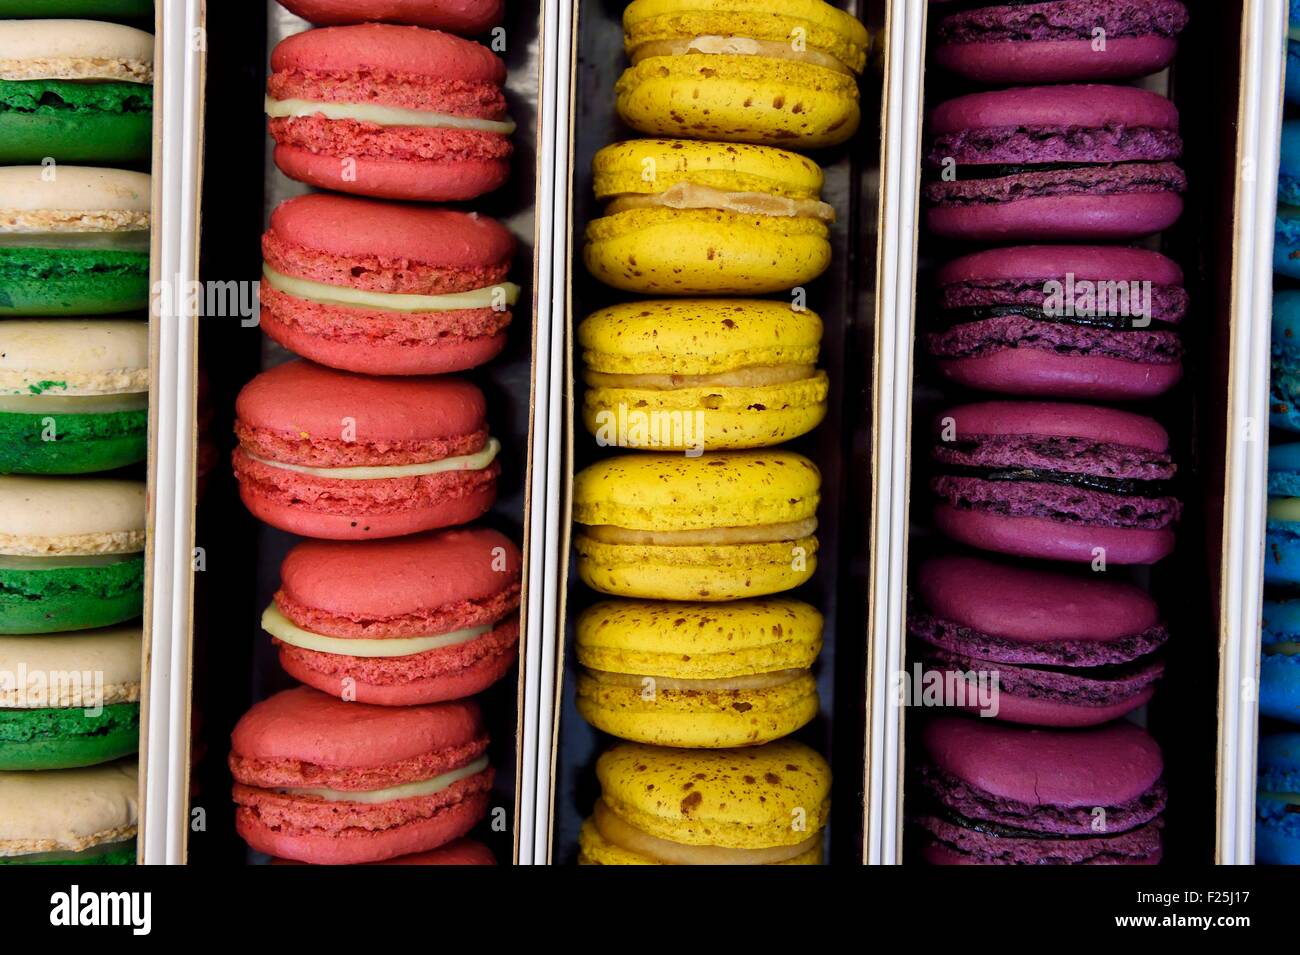 France, Var, Hyeres, Dominique chocolate and pastry shop, macaroon Stock Photo